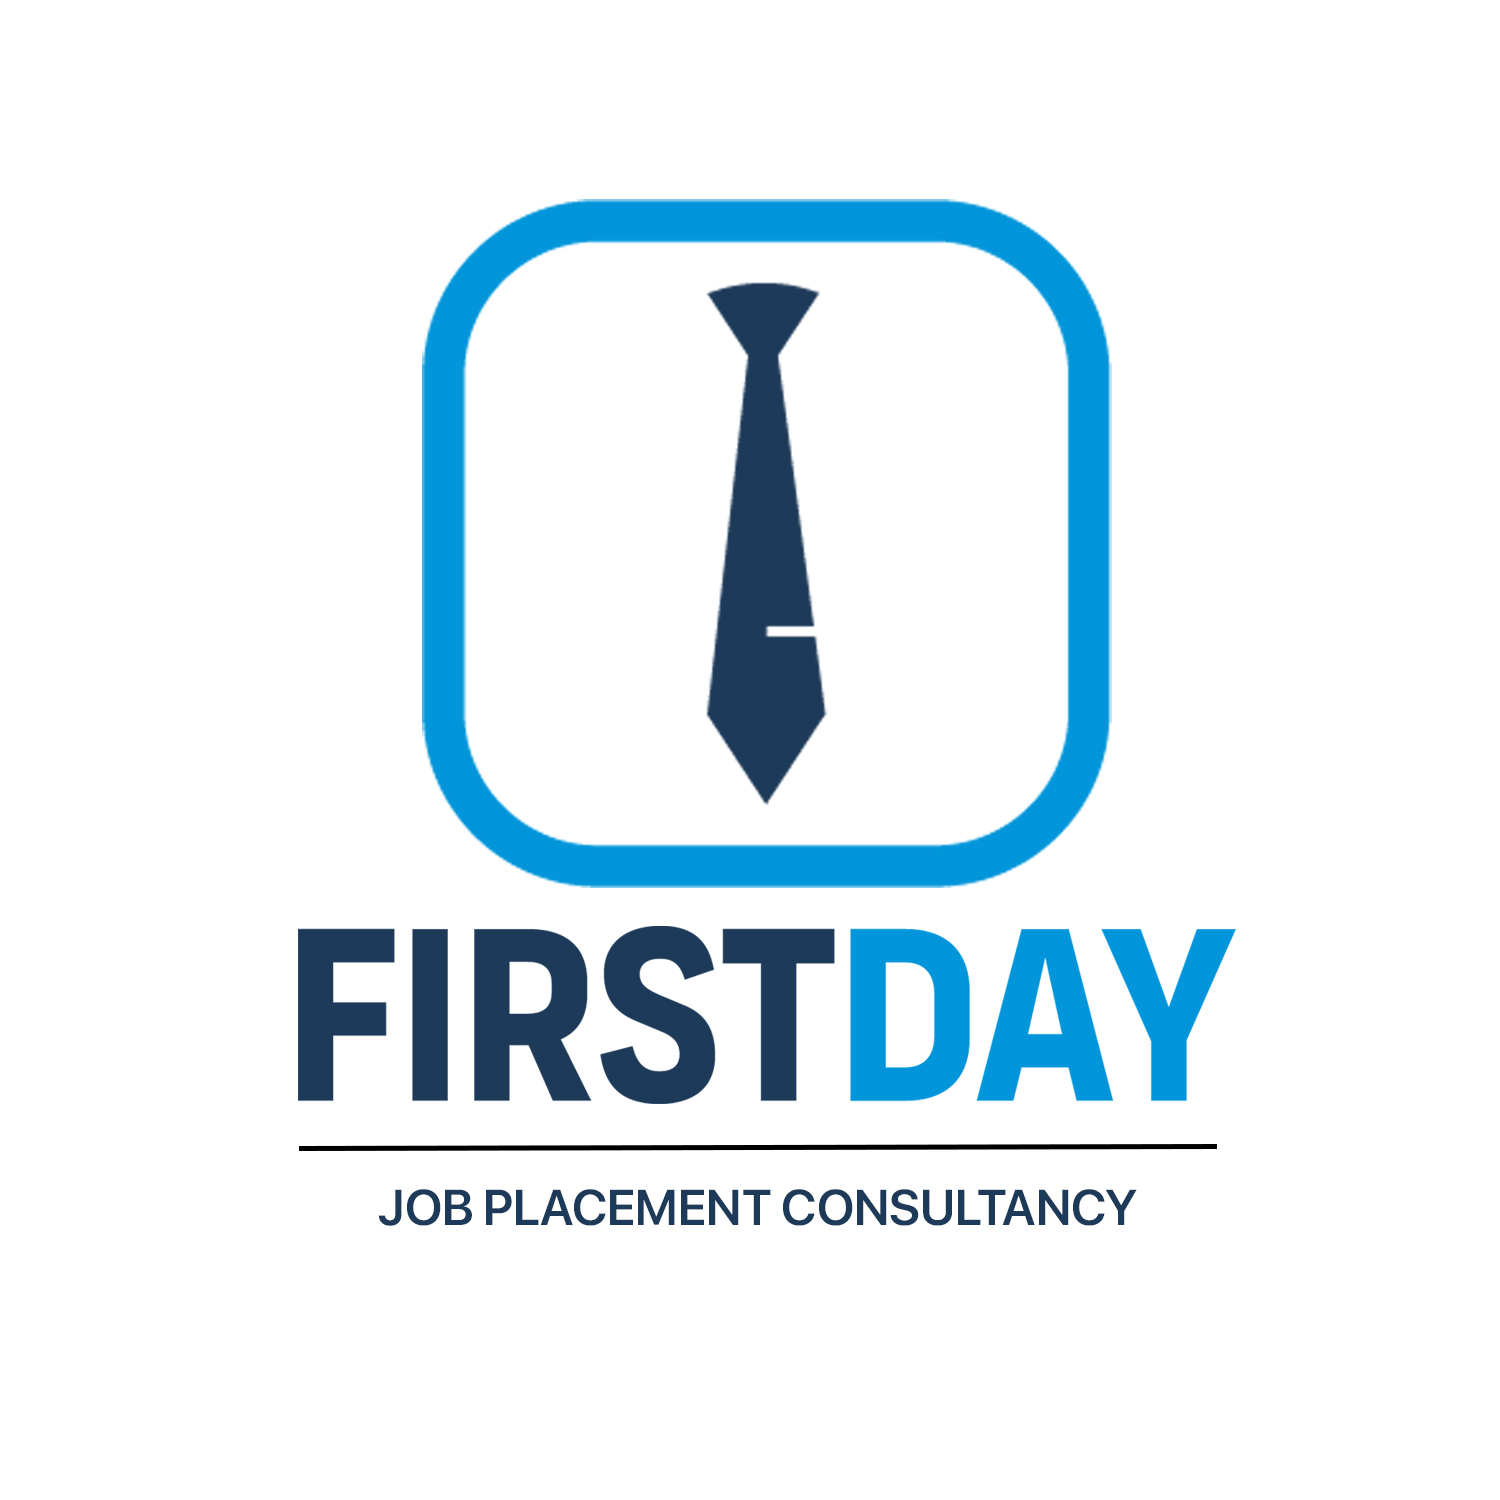 https://www.mncjobsindia.com/company/firstday-job-placement-consultancy-in-surat